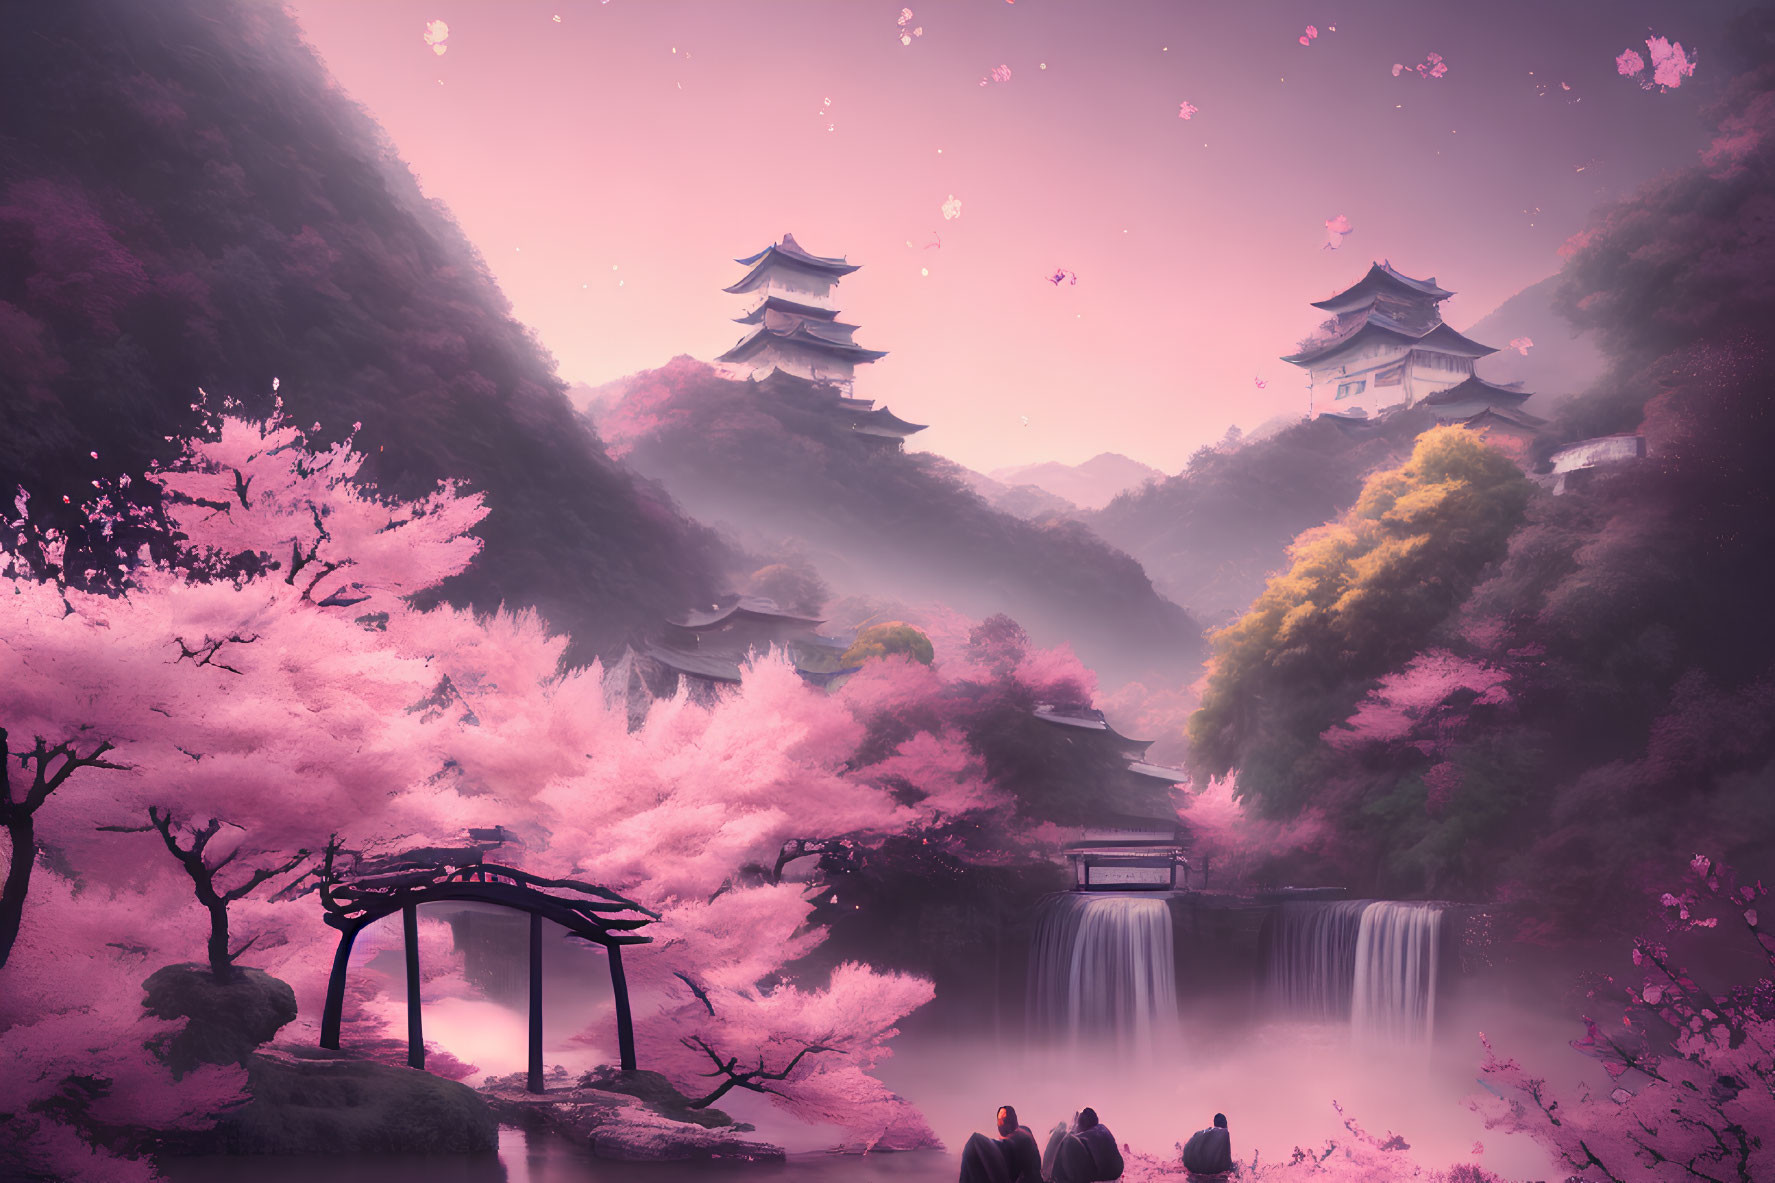 Tranquil landscape with cherry blossoms, pagodas, waterfall, and couple under arbor